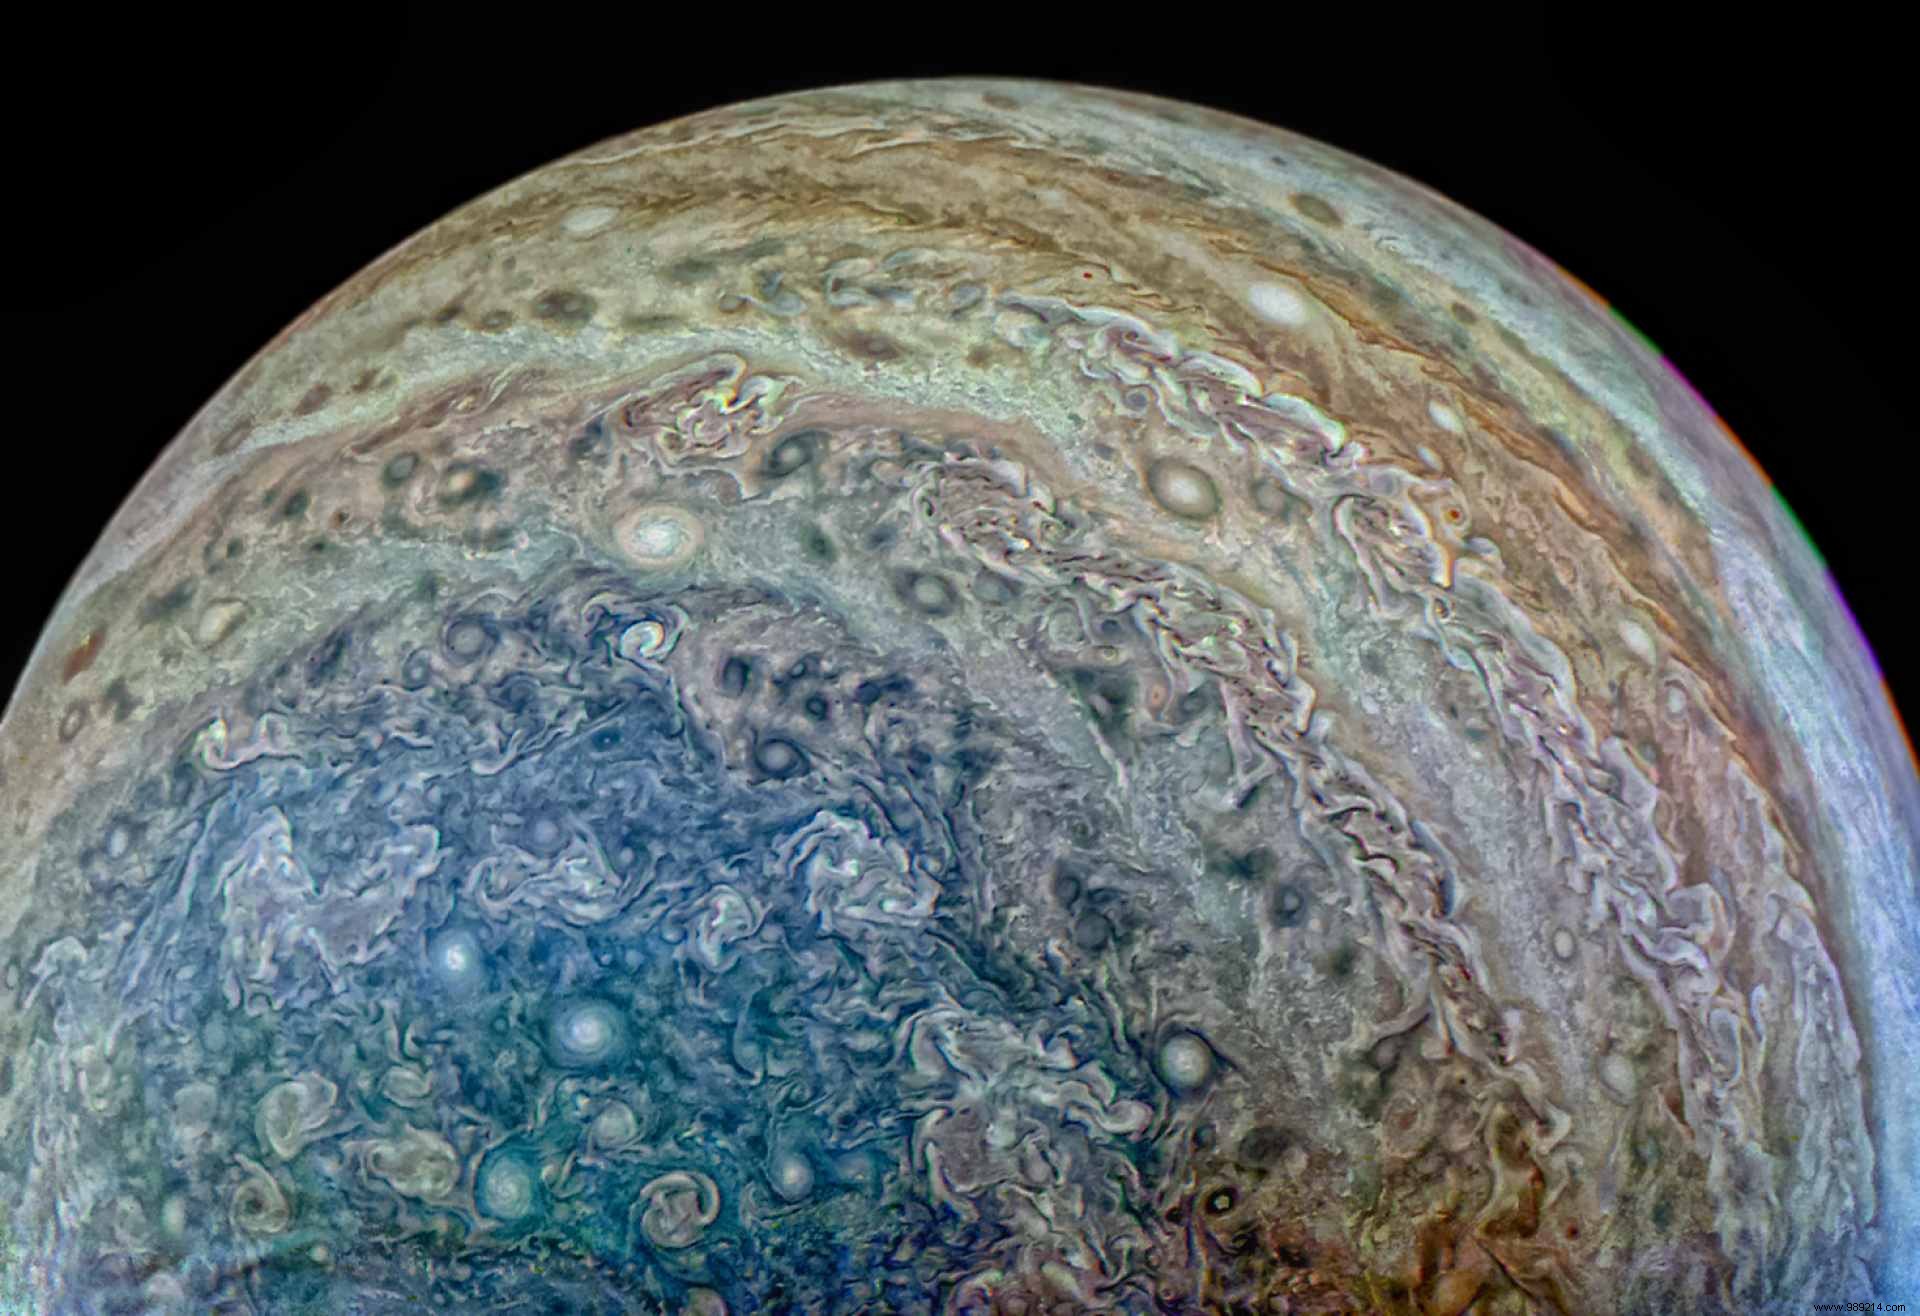 Could a probe pass through a gas giant like Jupiter? 